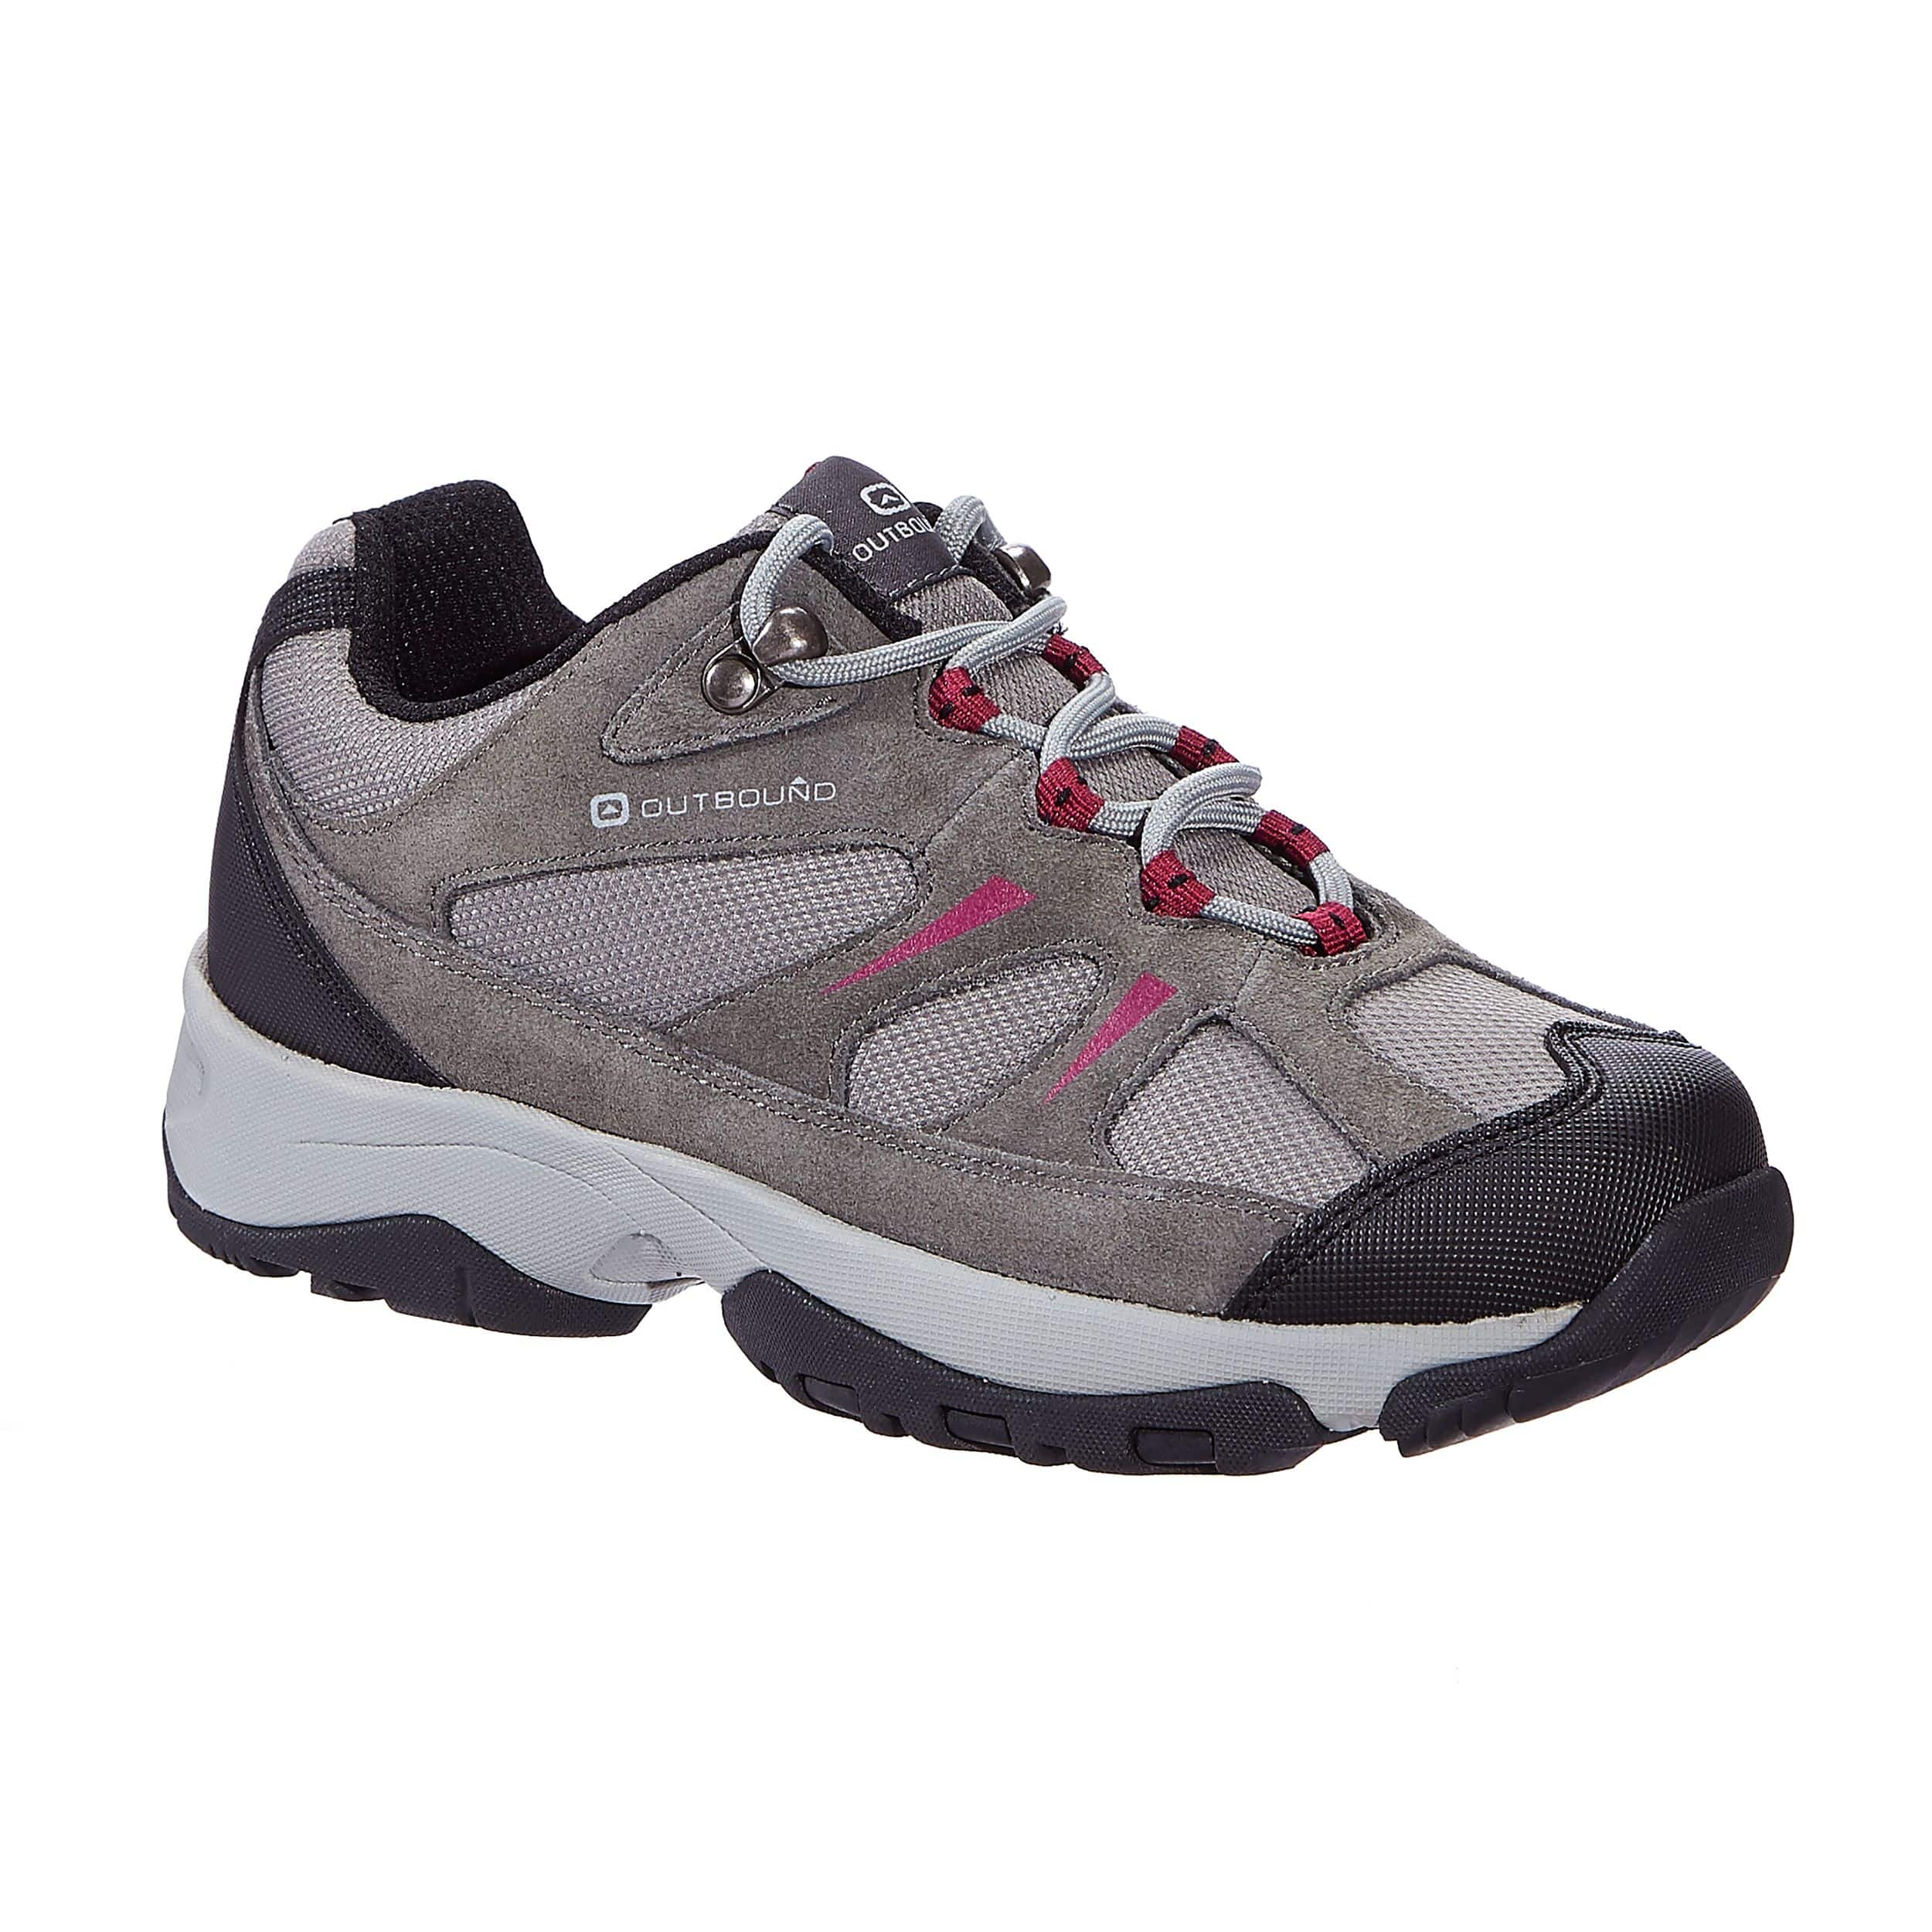 Outbound Women's Trail Low-Cut Water-Resistant Hiking Boots